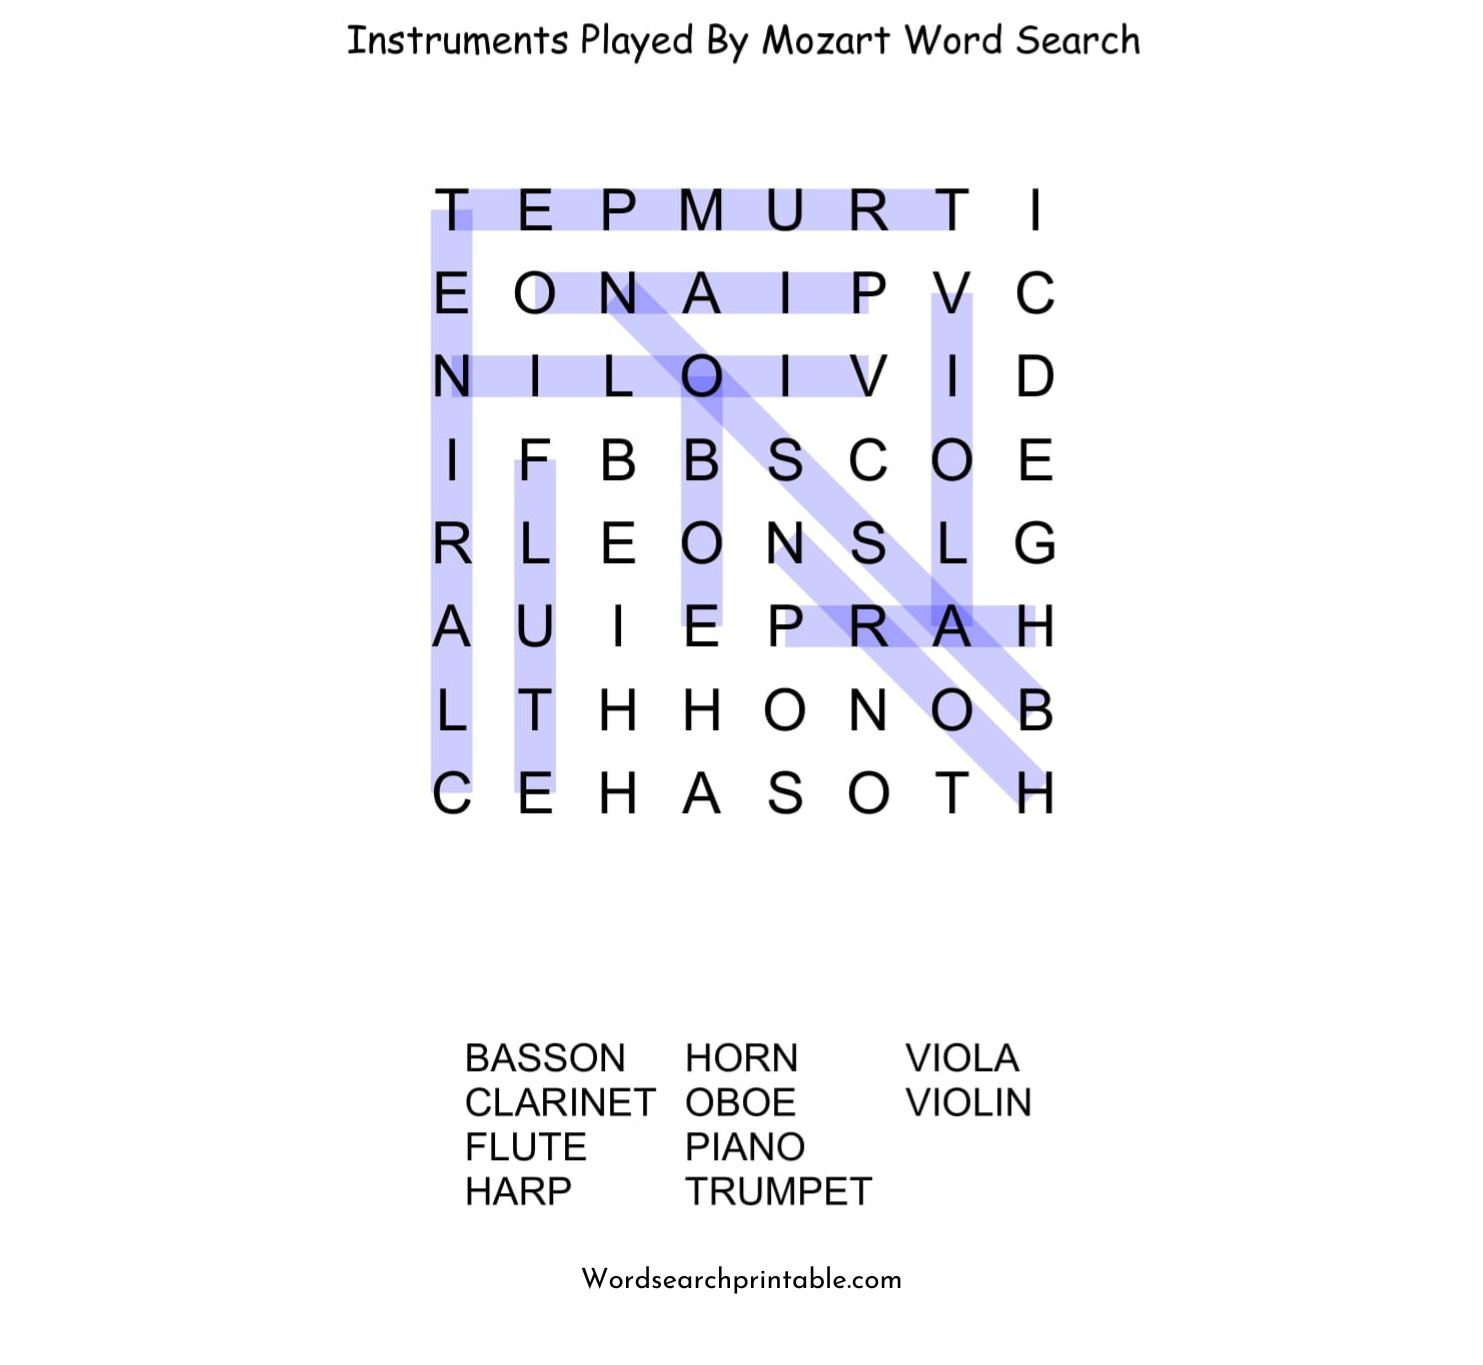 instruments played by mozart word search puzzle solution